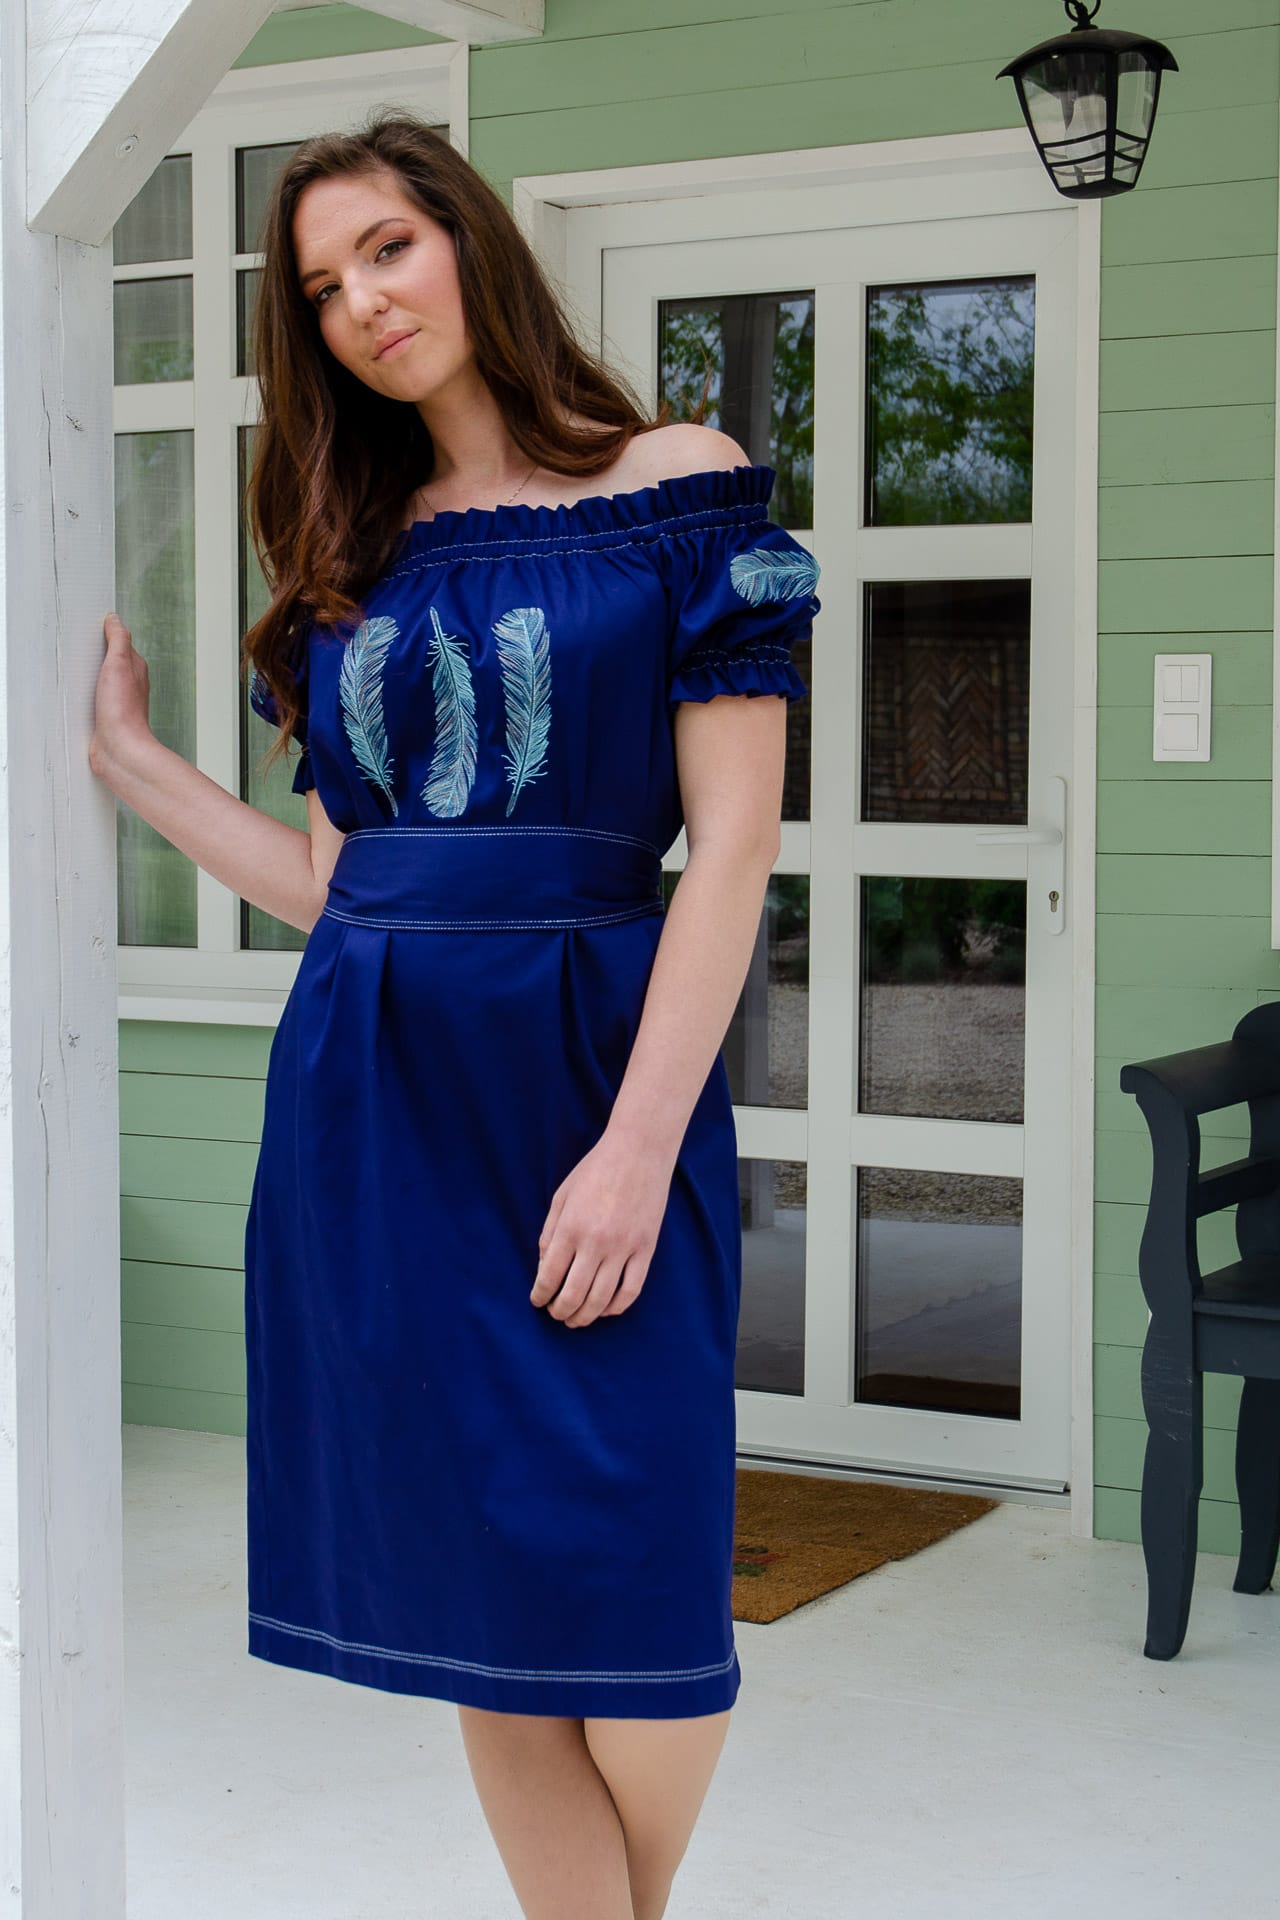 Embroidered blue dress